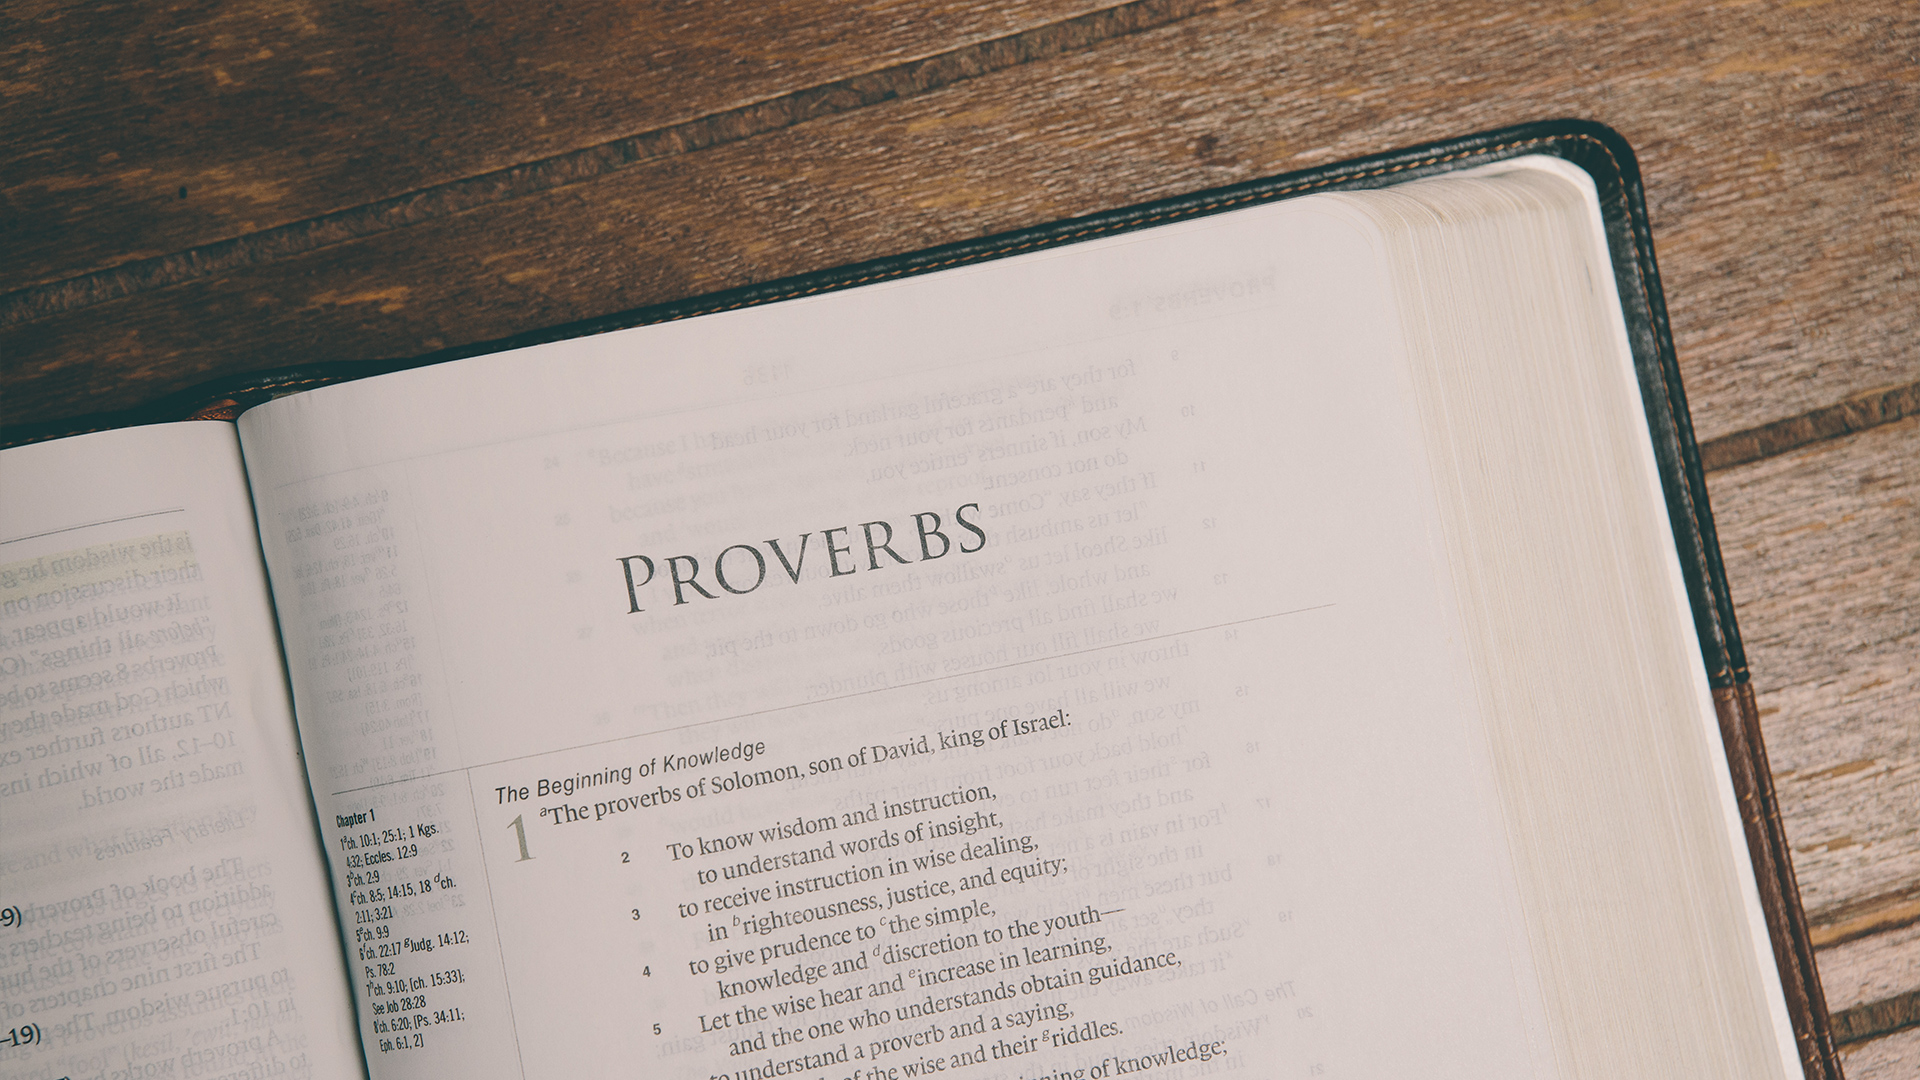 An Interview with Rev. Dr. David Coe on Provoking Proverbs